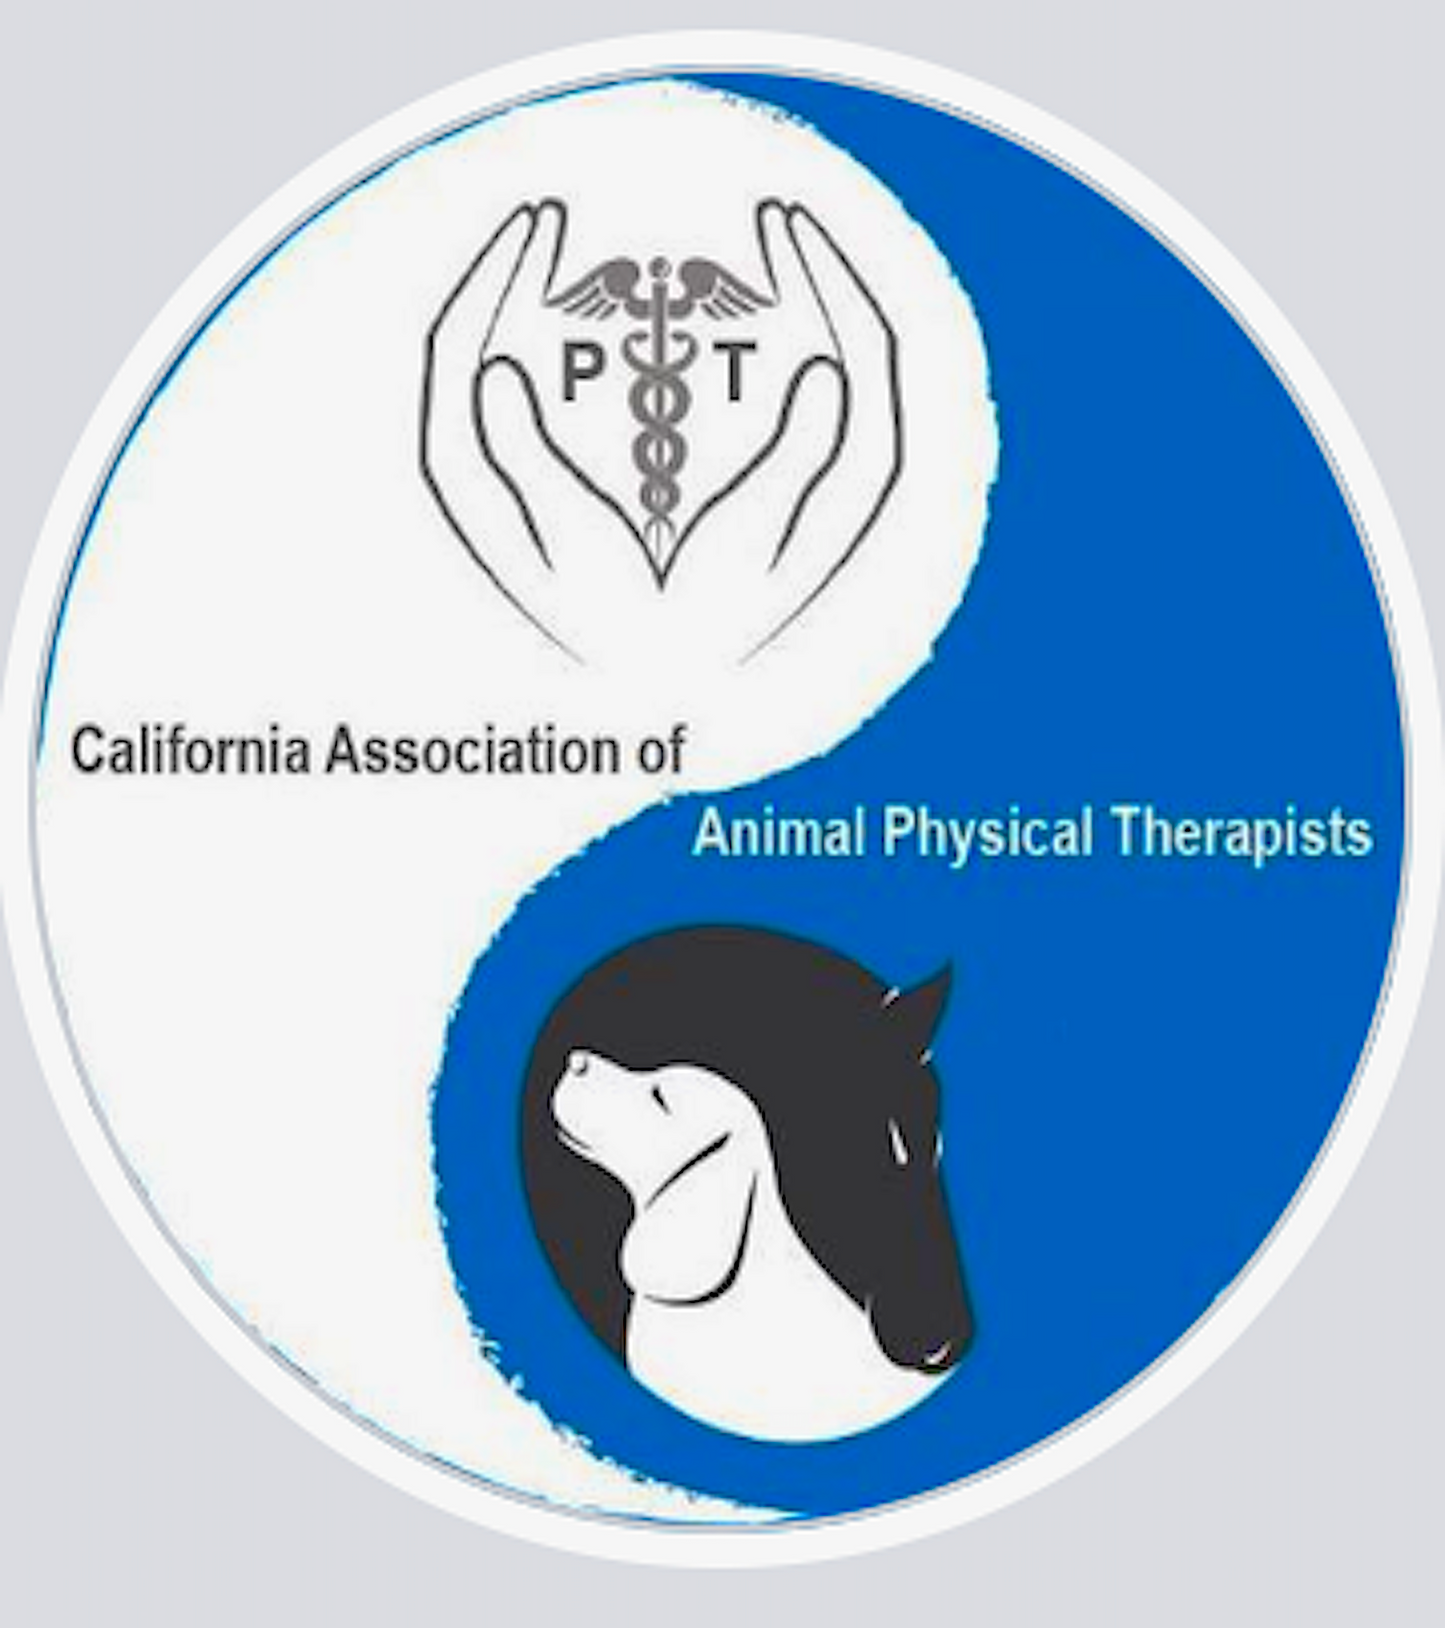 CAAPT: California Association of Animal Physical Therapists